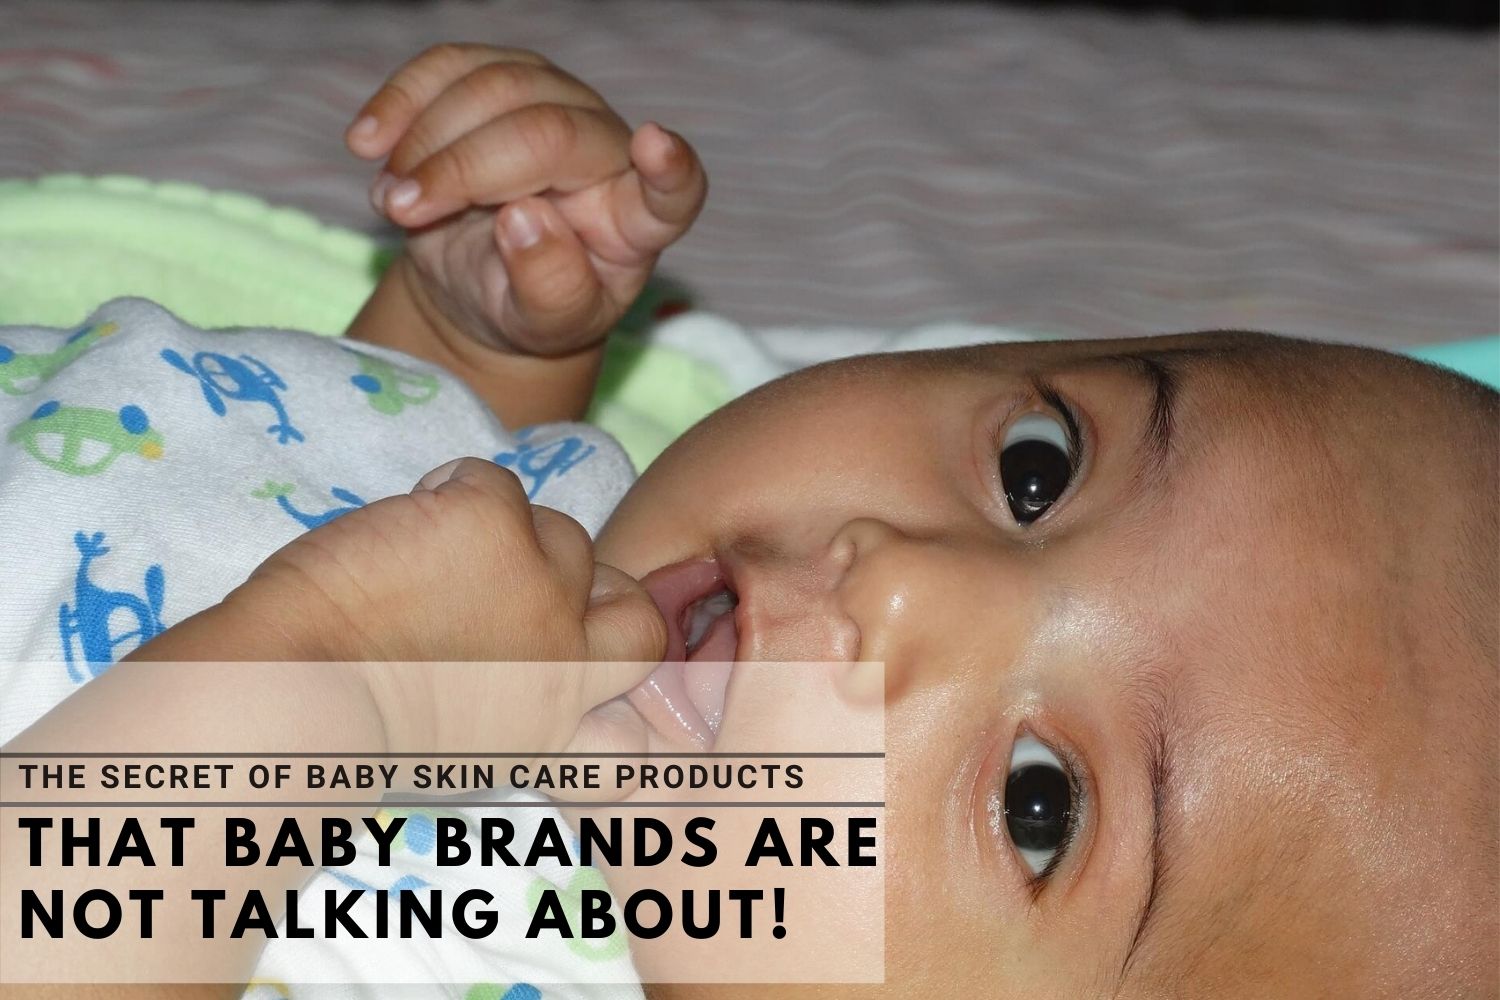 The Secret Of Baby Skin Care Products That Baby Brands Are Not Talking About!